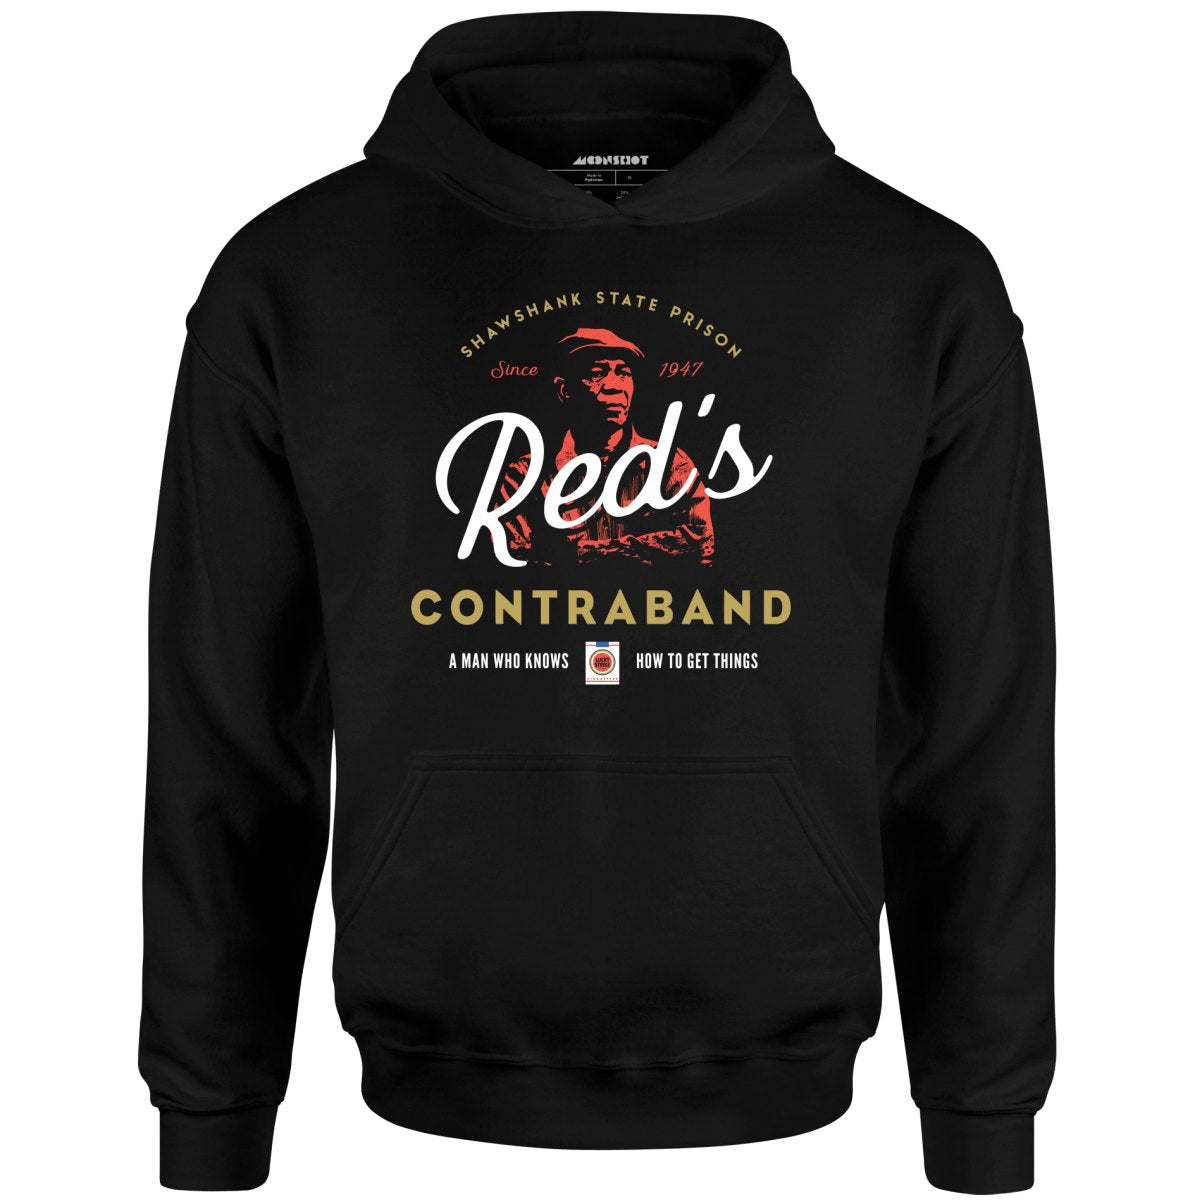 Red's Contraband - Unisex Hoodie